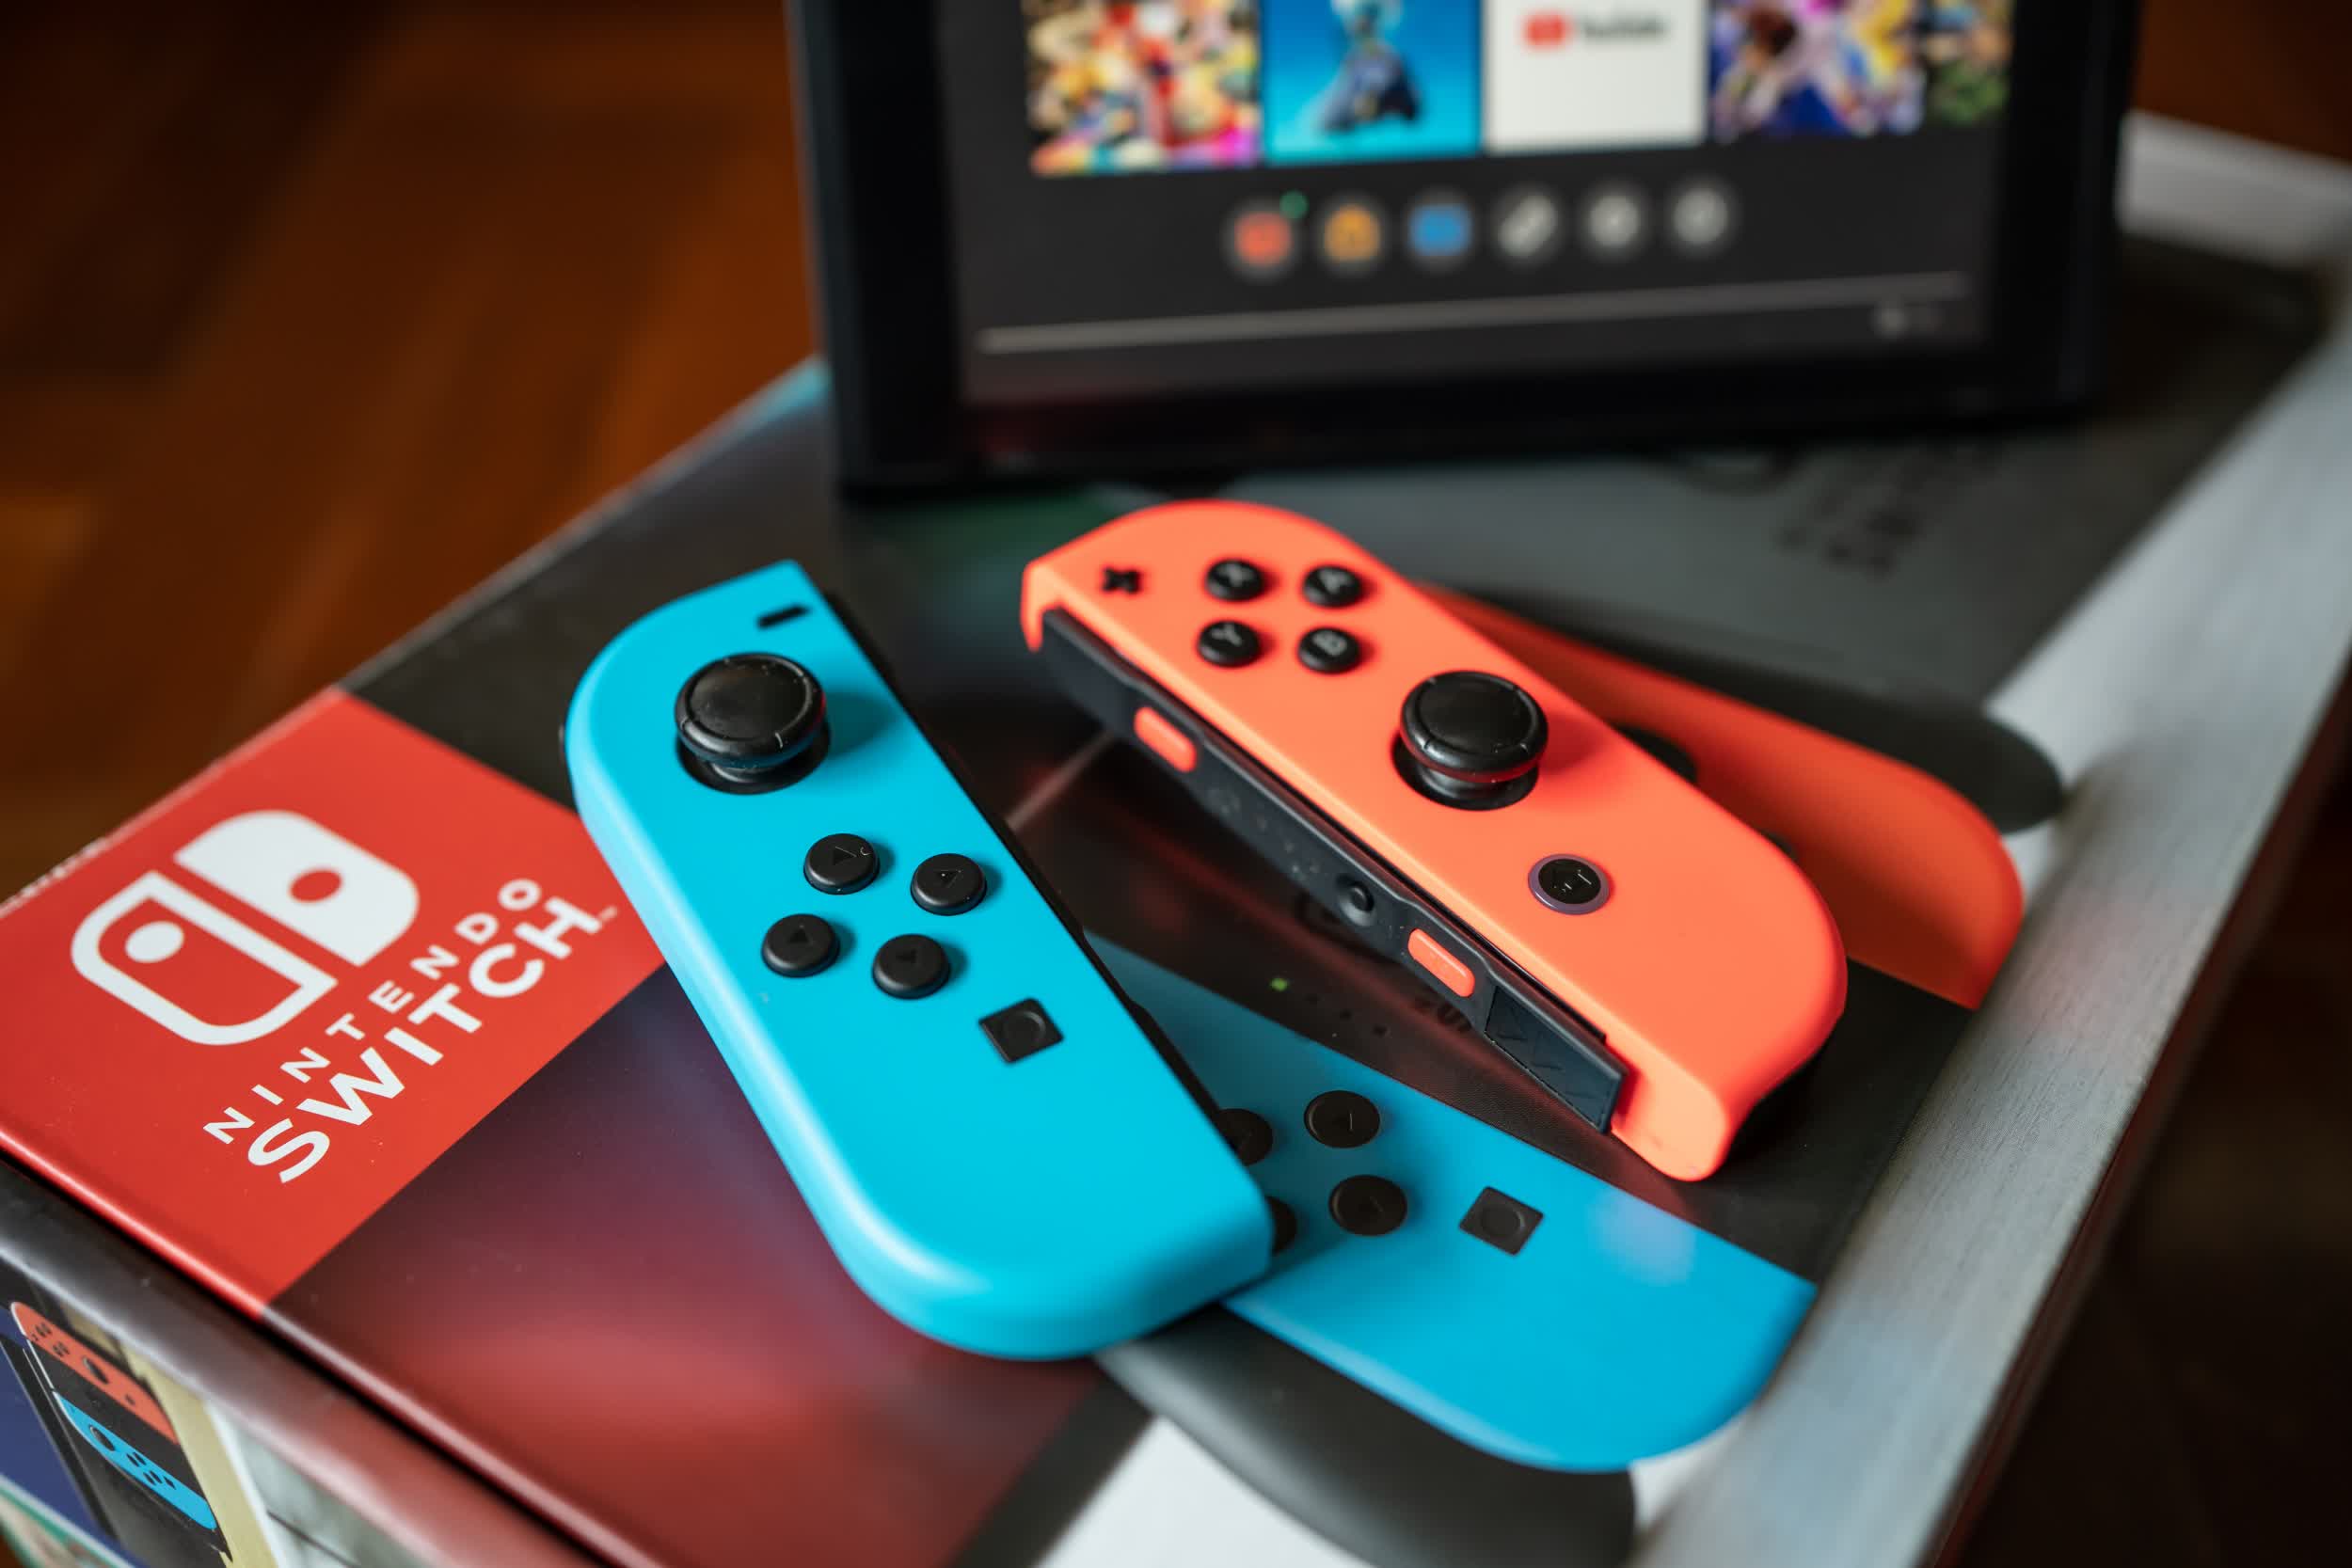 Nintendo Switch lifetime sales close in on PS3, Wii, and PlayStation